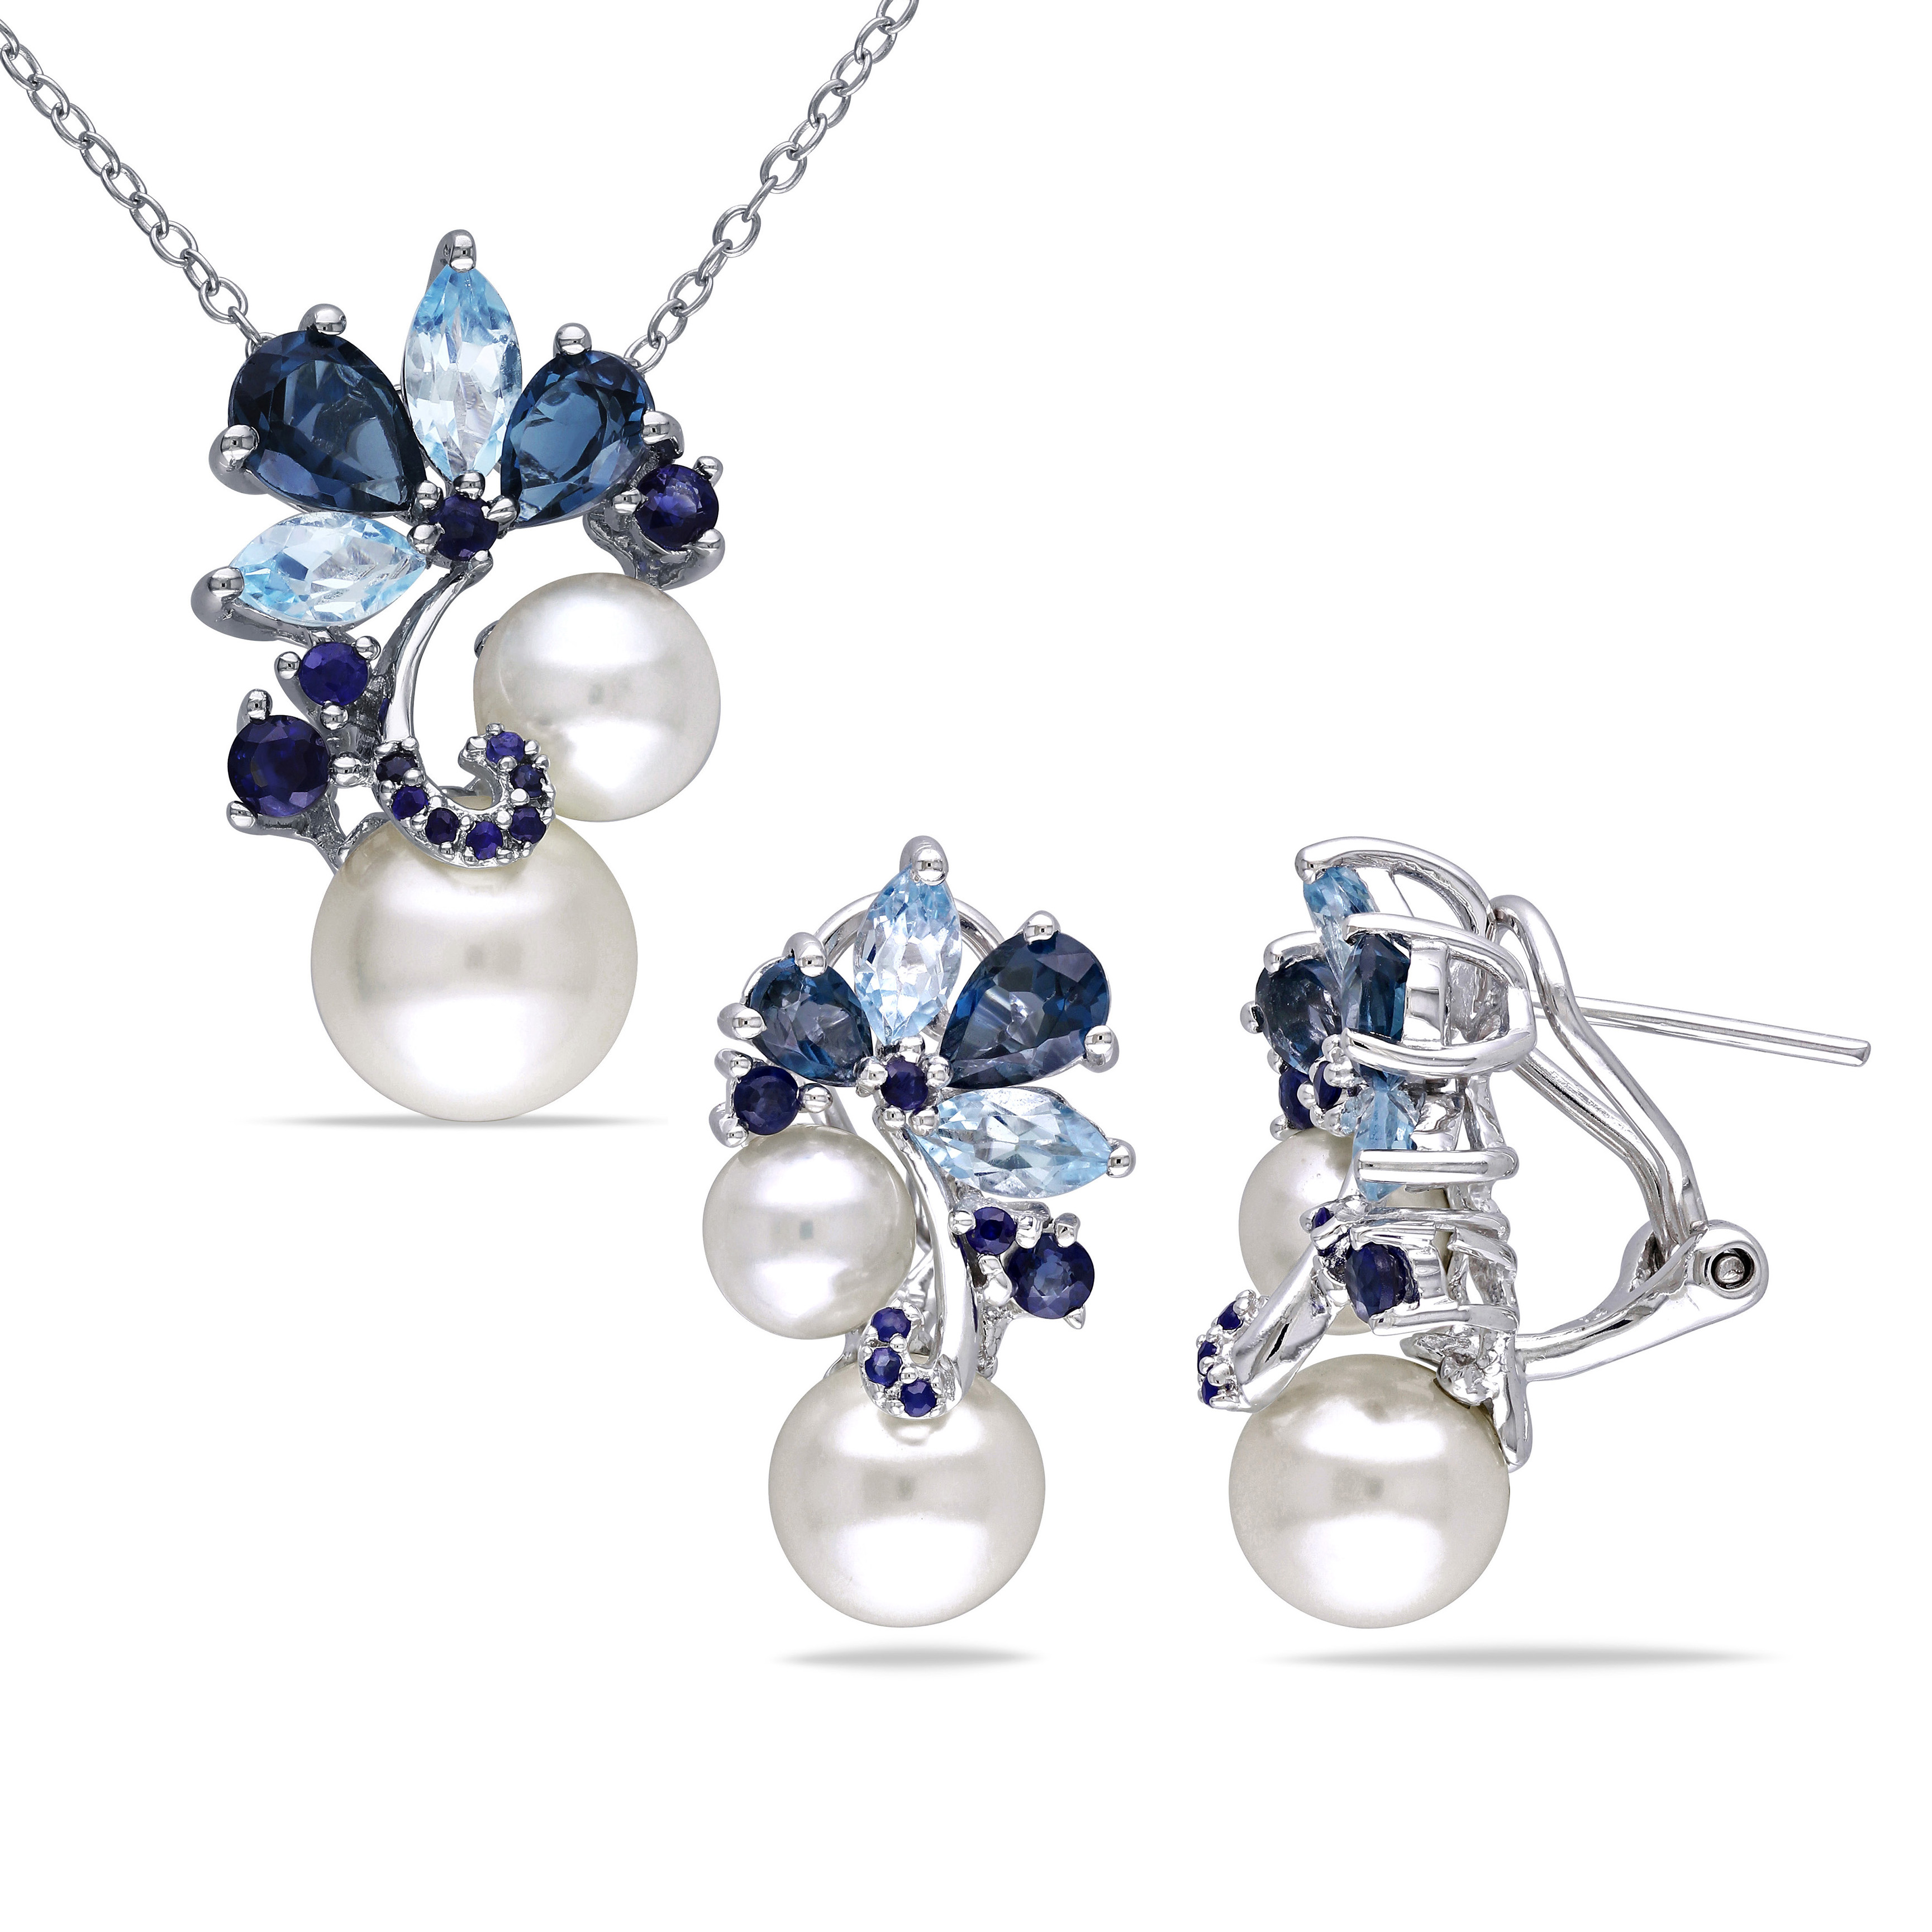 2 Pc Set of 5 3/4 CT TGW Blue Topaz - London, Blue Topaz - Sky, Sapphire And Freshwater Cultured Pearl Earrings & Pendant With Chain in Sterling Silver